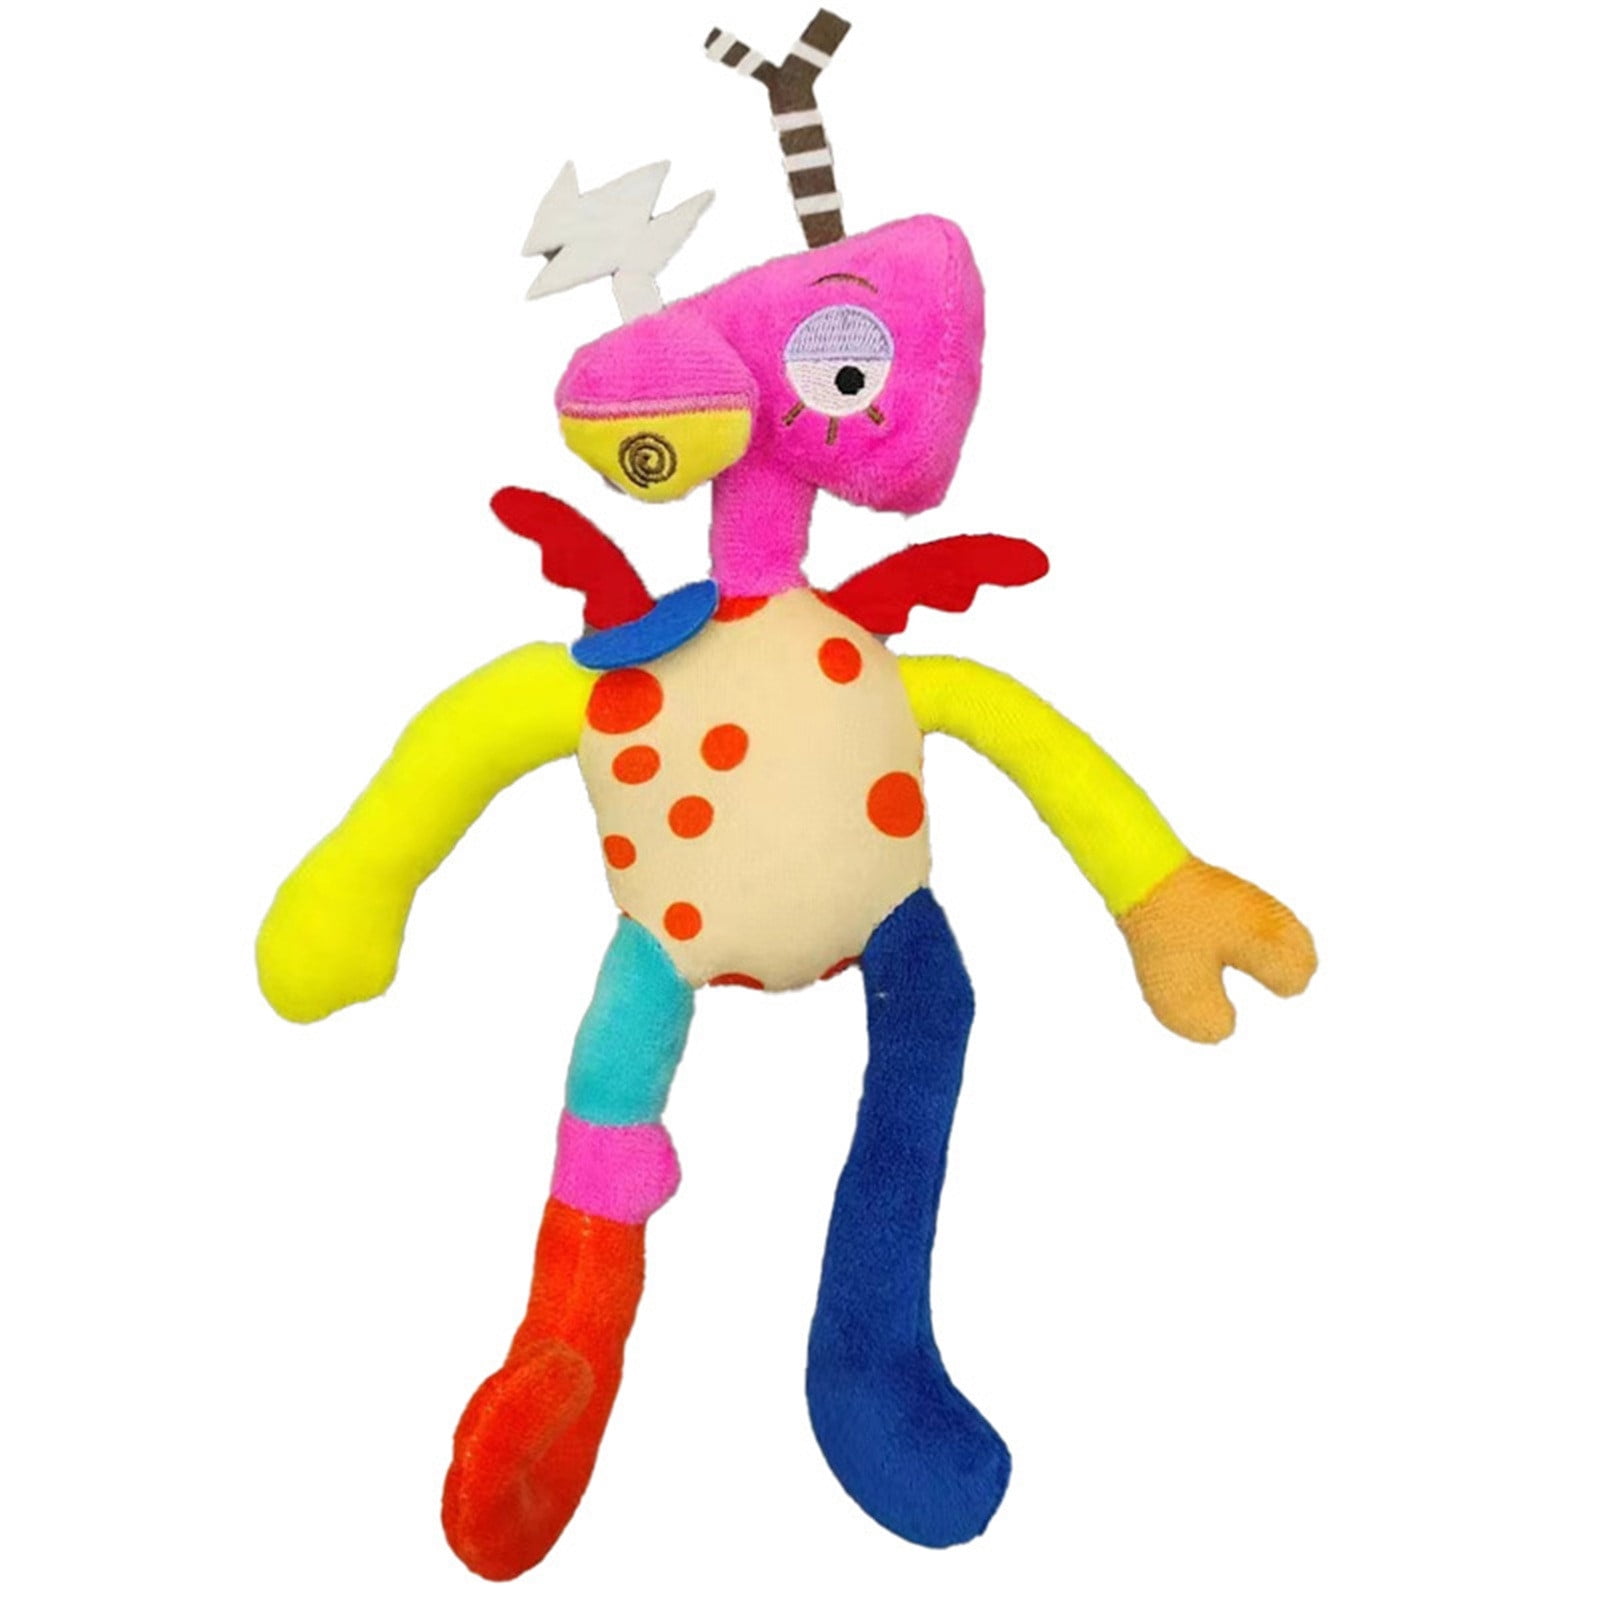 Cartoon The Amazing Digital Circus Figure Plush Doll Toy Stuffed Action Toy  Gift